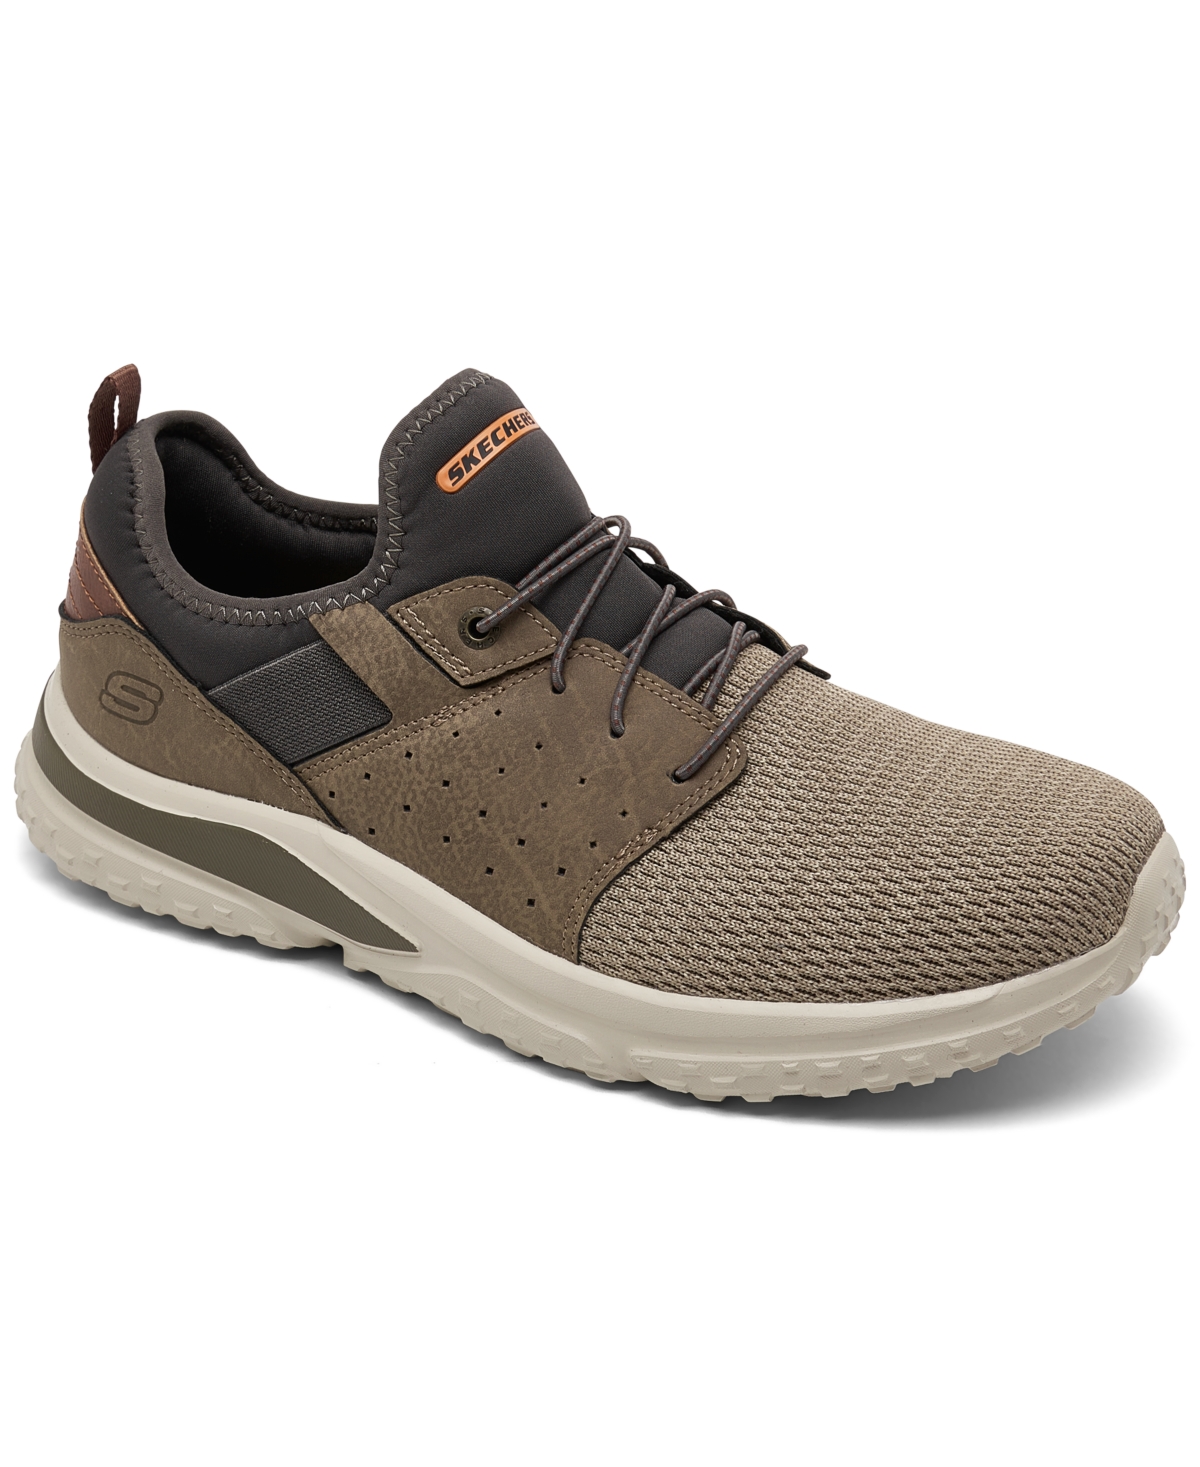 Skechers Men's Relaxed Fit Solvano In Taupe